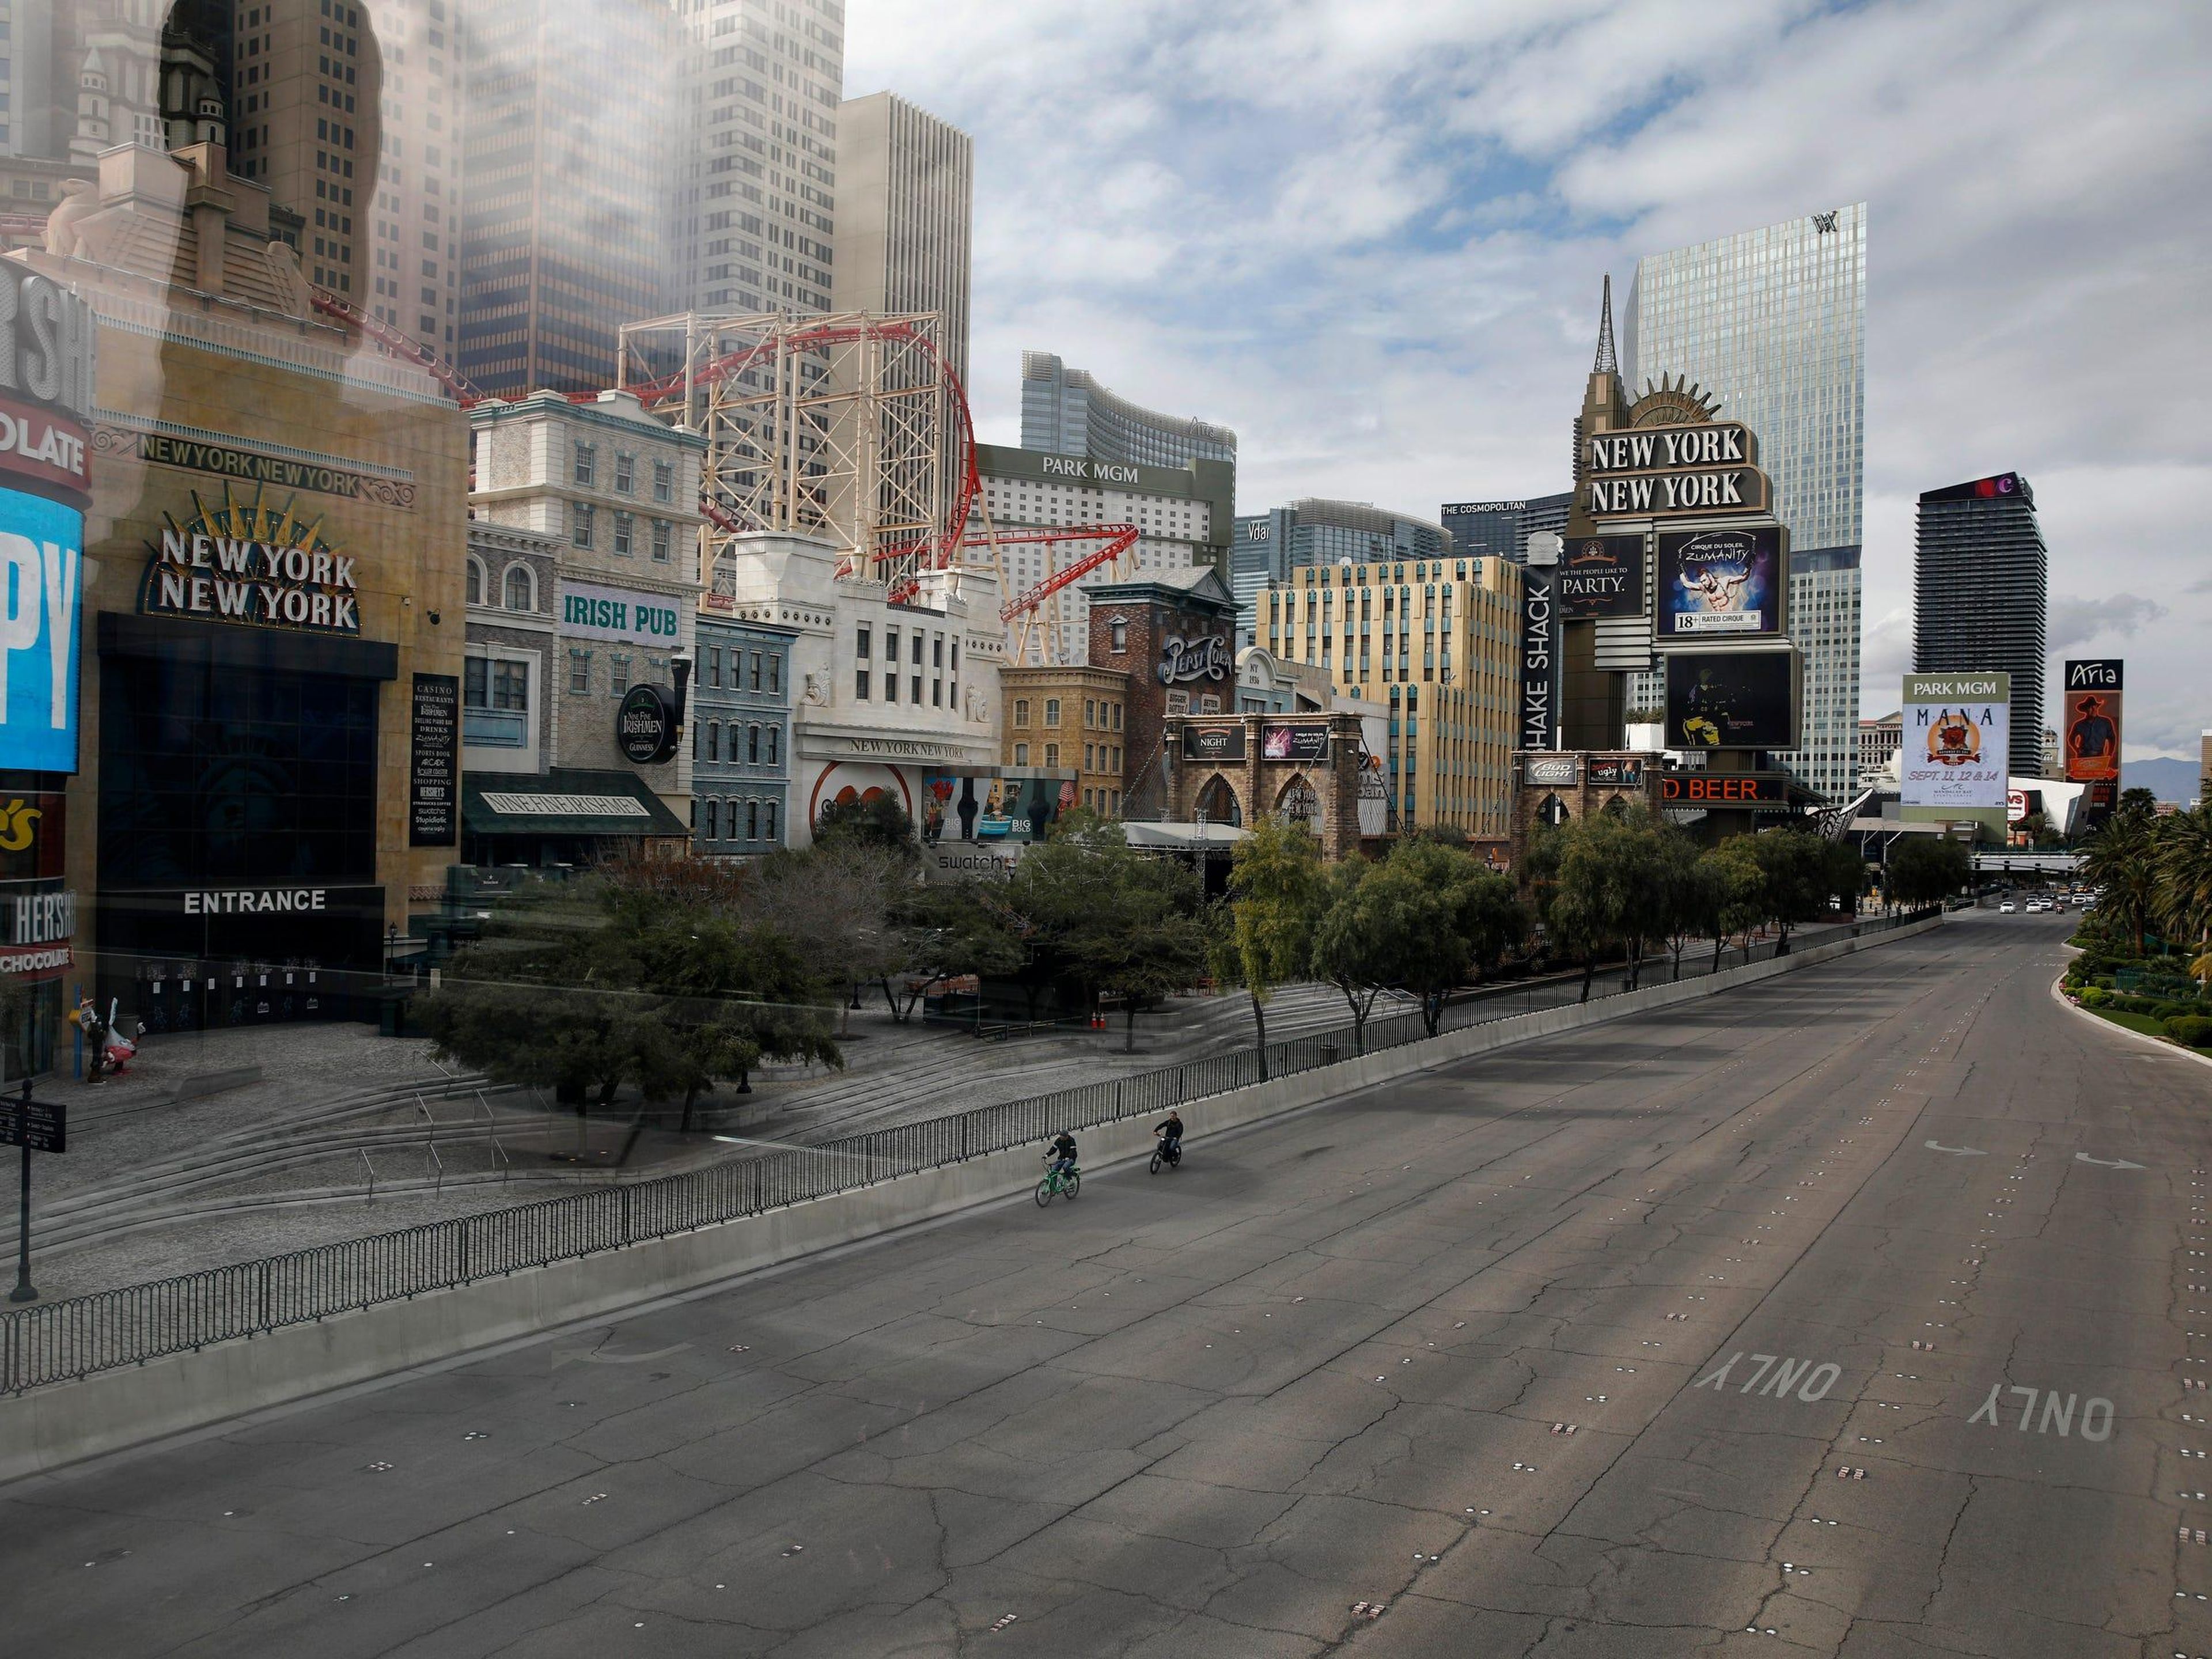 AFTER: On March 17, the governor of Nevada ordered nonessential businesses to close for 30 days, leaving the Las Vegas Strip looking like a ghost town.